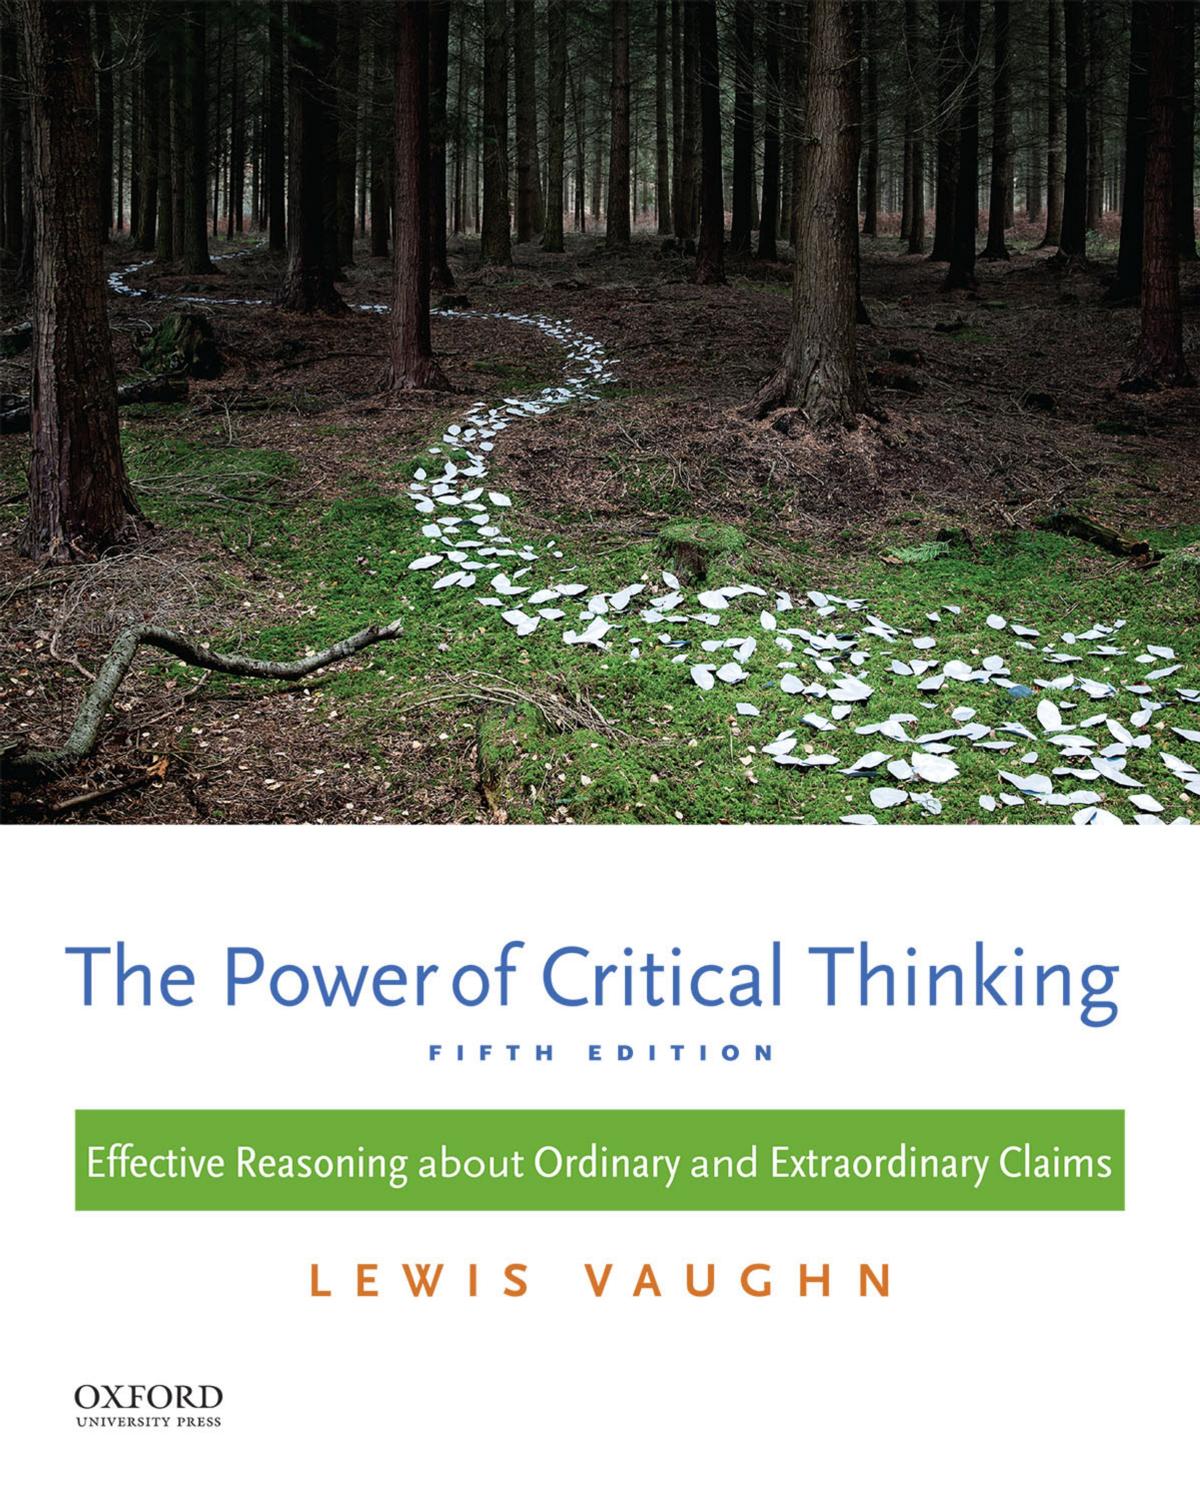 The Power of Critical Thinking: Effective Reasoning About Ordinary and Extraordinary Claims - Fifth Edition